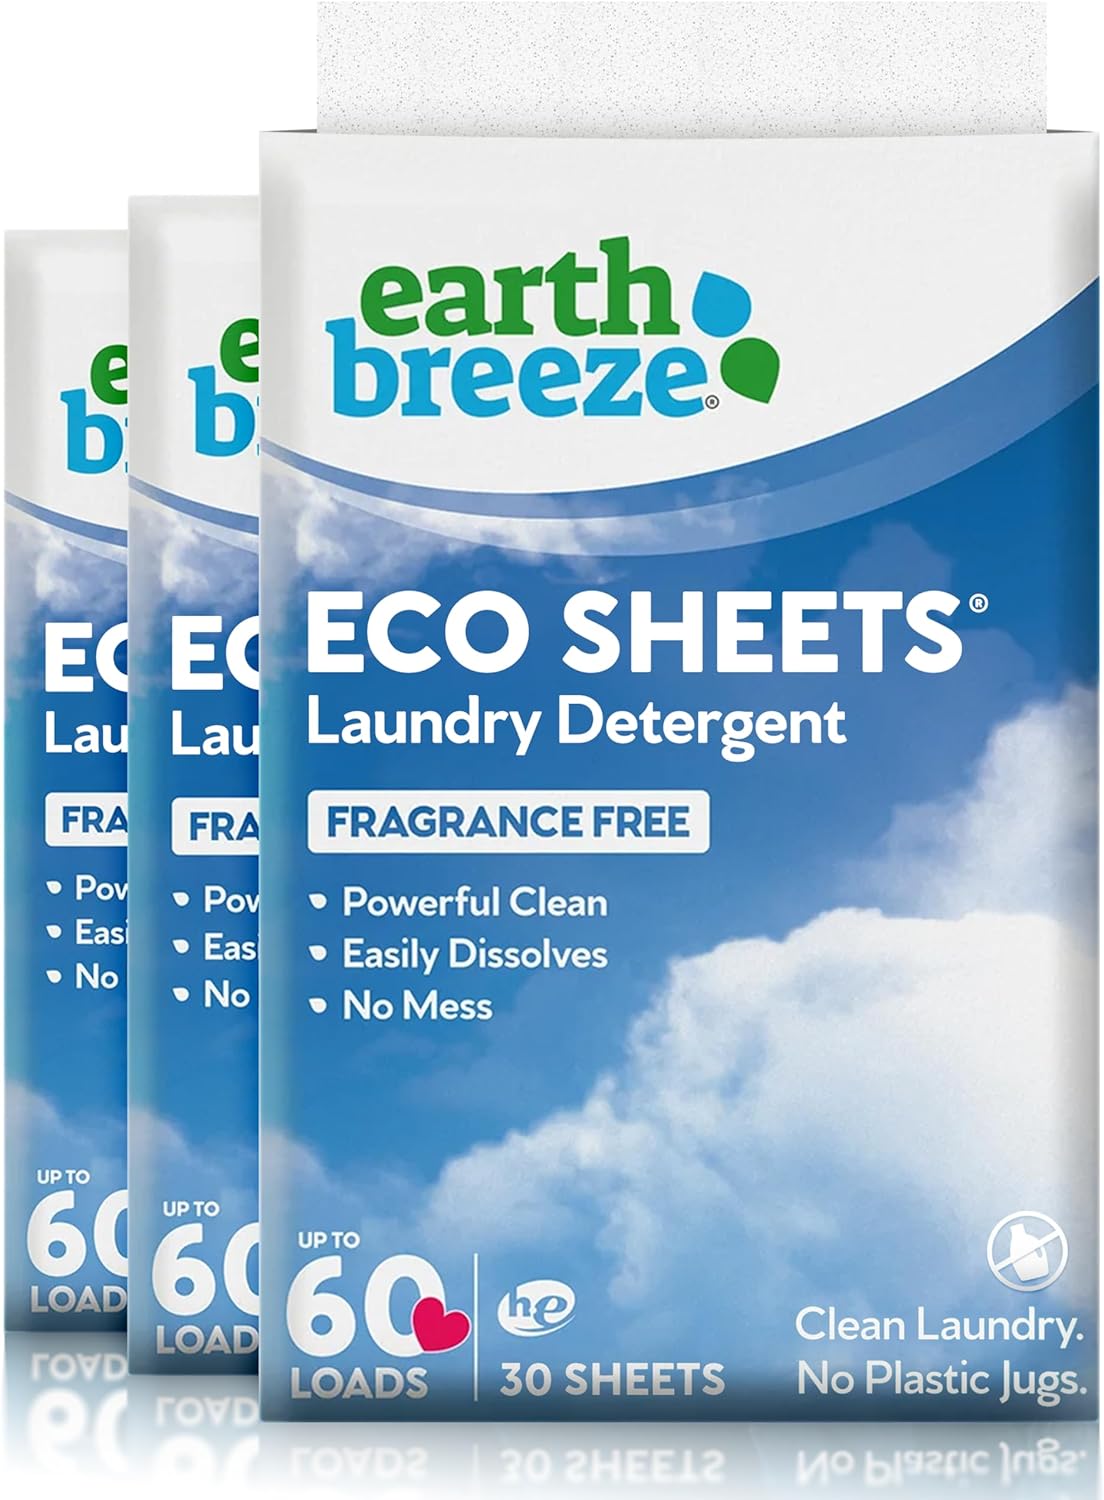 I love Earth Breeze! It is SO easy to use and it comes in a slim package for easy storage. I love that Im helping Earth by not buying another plastic container!This product works great and cleans my clothes thoroughly. I found that tearing it up and tossing it on the bottom of the washing machine before loading cloths works best. The company ships a new package timely, so Im never without soap. The soap has a pleasant fragrance as well and it never smells harsh or bleachy.I love this product!